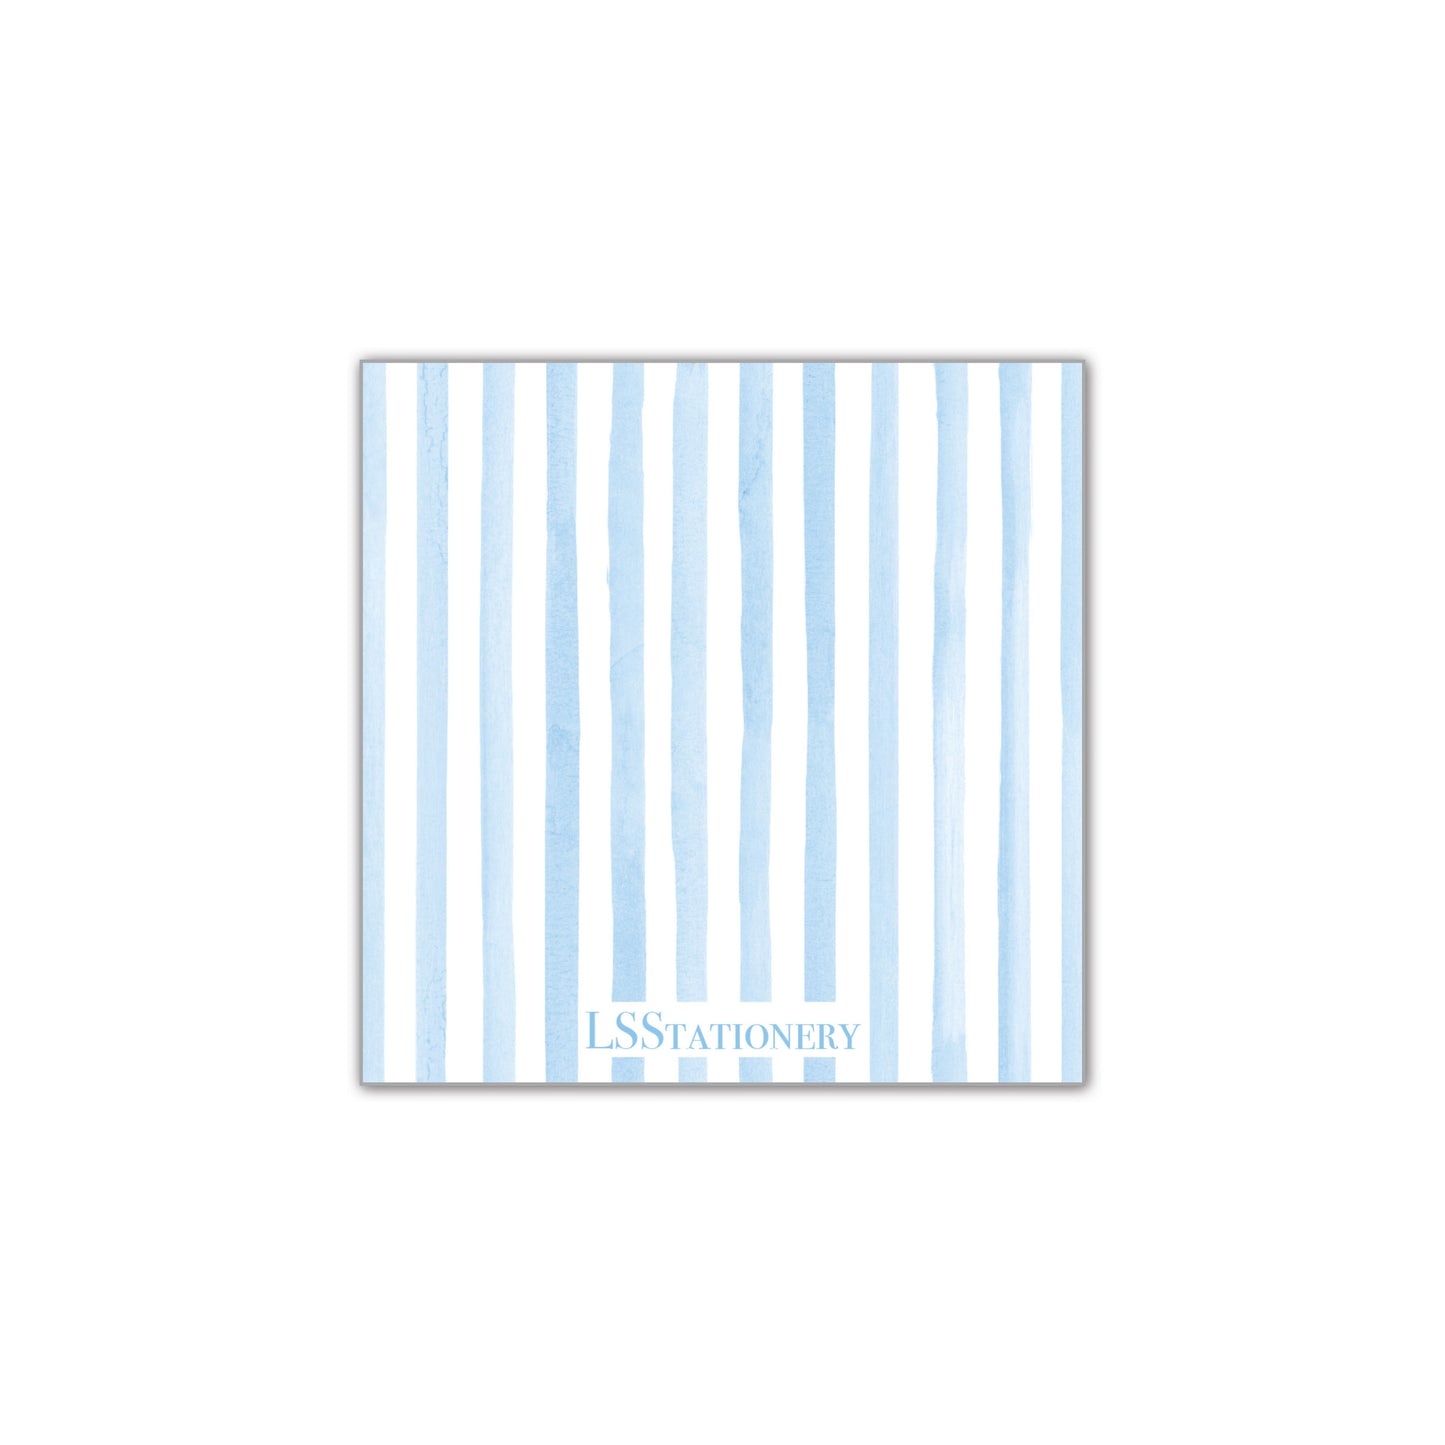 Dig or Treat - blue stripe Gift Tag